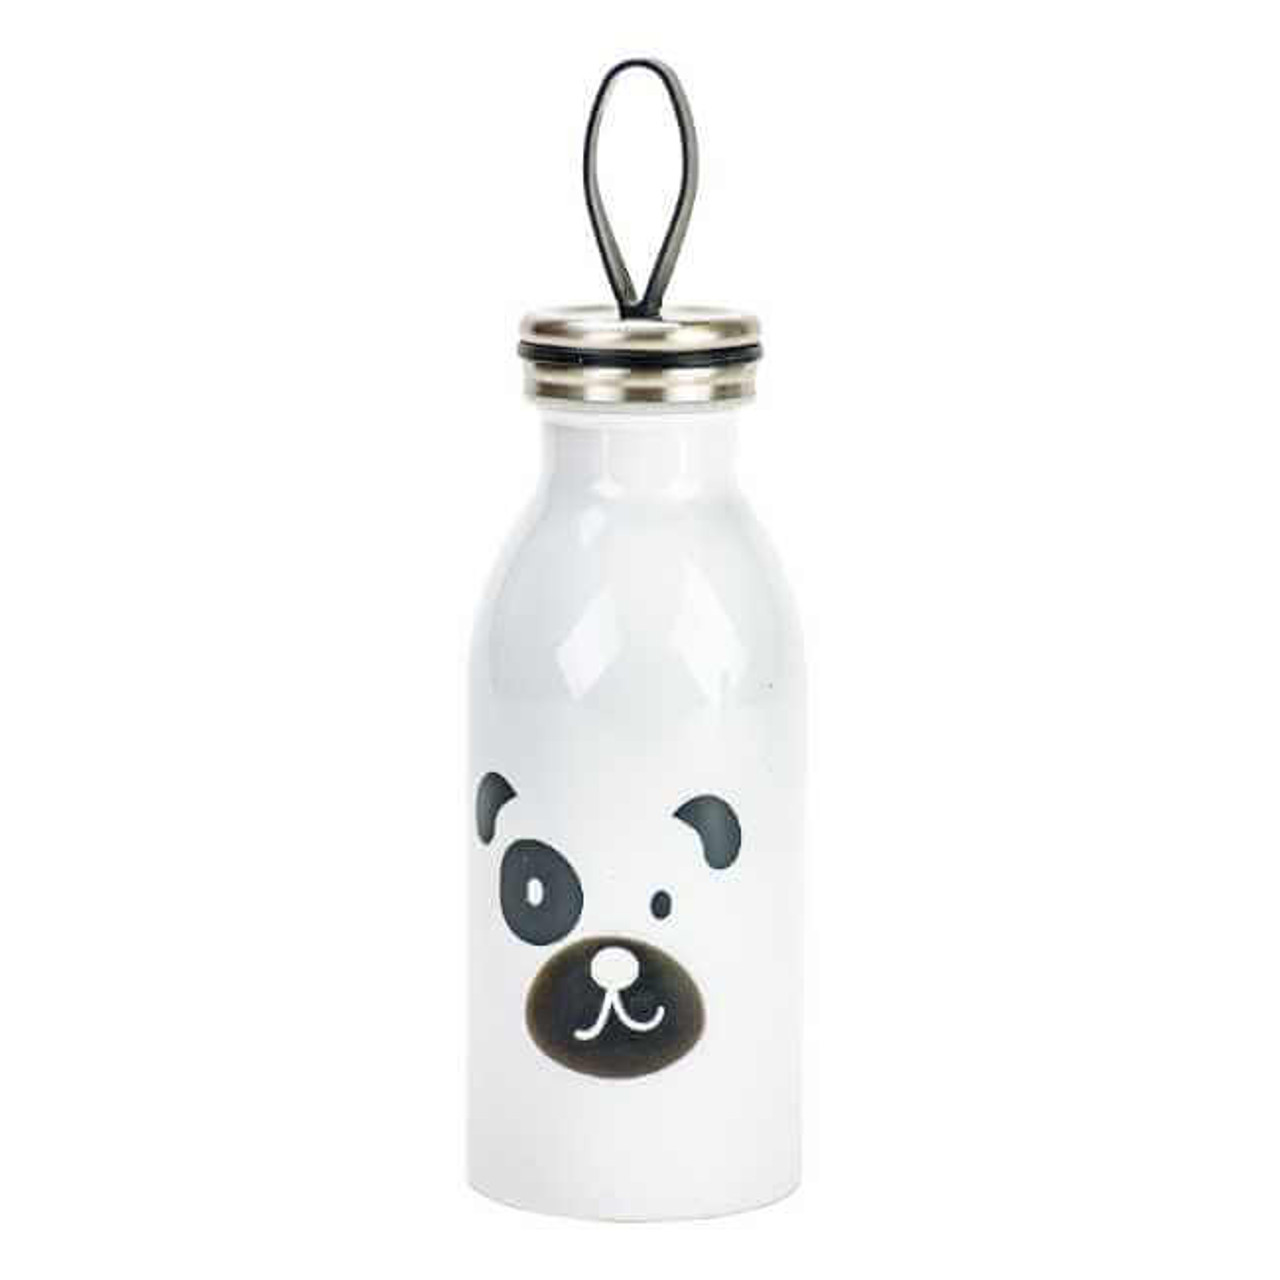 https://cdn11.bigcommerce.com/s-e0ctooh4/images/stencil/1280x1280/products/7124/18466/17336_12_OZ_KIDS_SS_SILICONE_BOTTLE_DOG__83562.1554062526.jpg?c=2